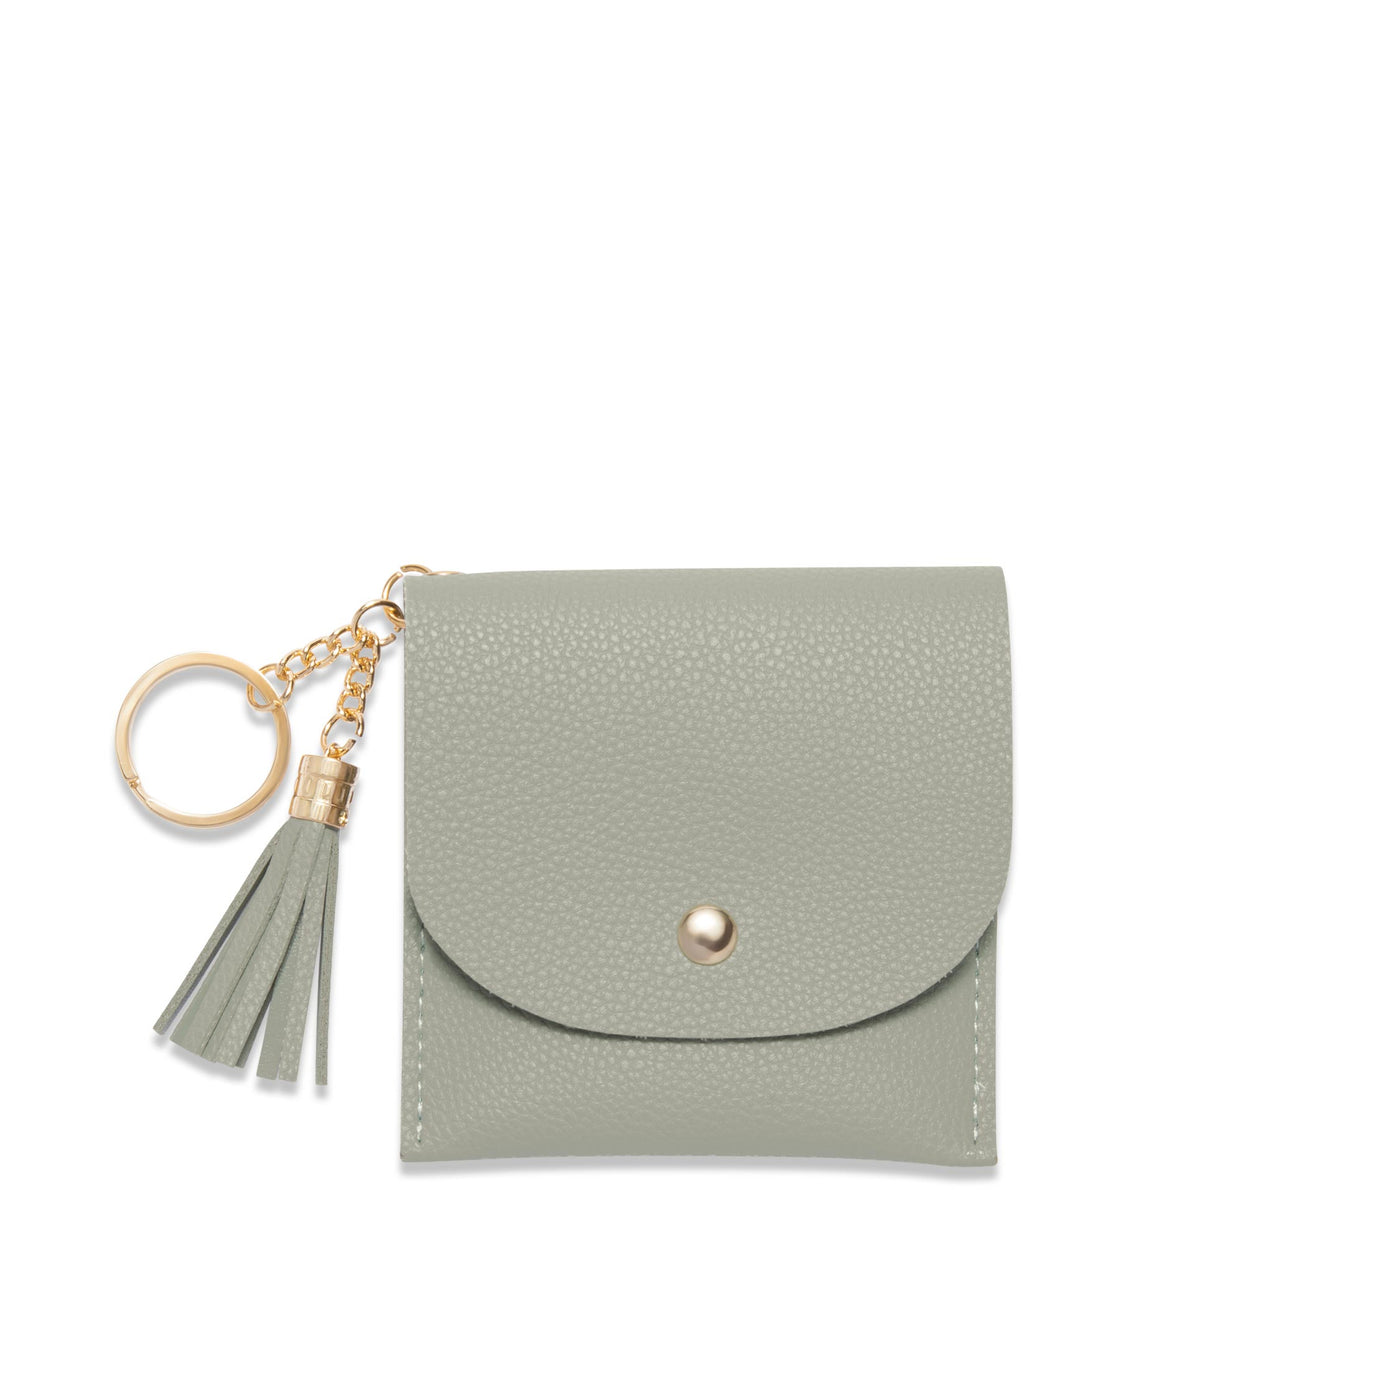 Lark and Ives / Vegan Leather Accessories / Small Accessories / Wallet / Mini Wallet / Card Case / Card Holder / Button snap closure / Flap Wallet / Card Purse with Gold Button and Keyring / Pale Green